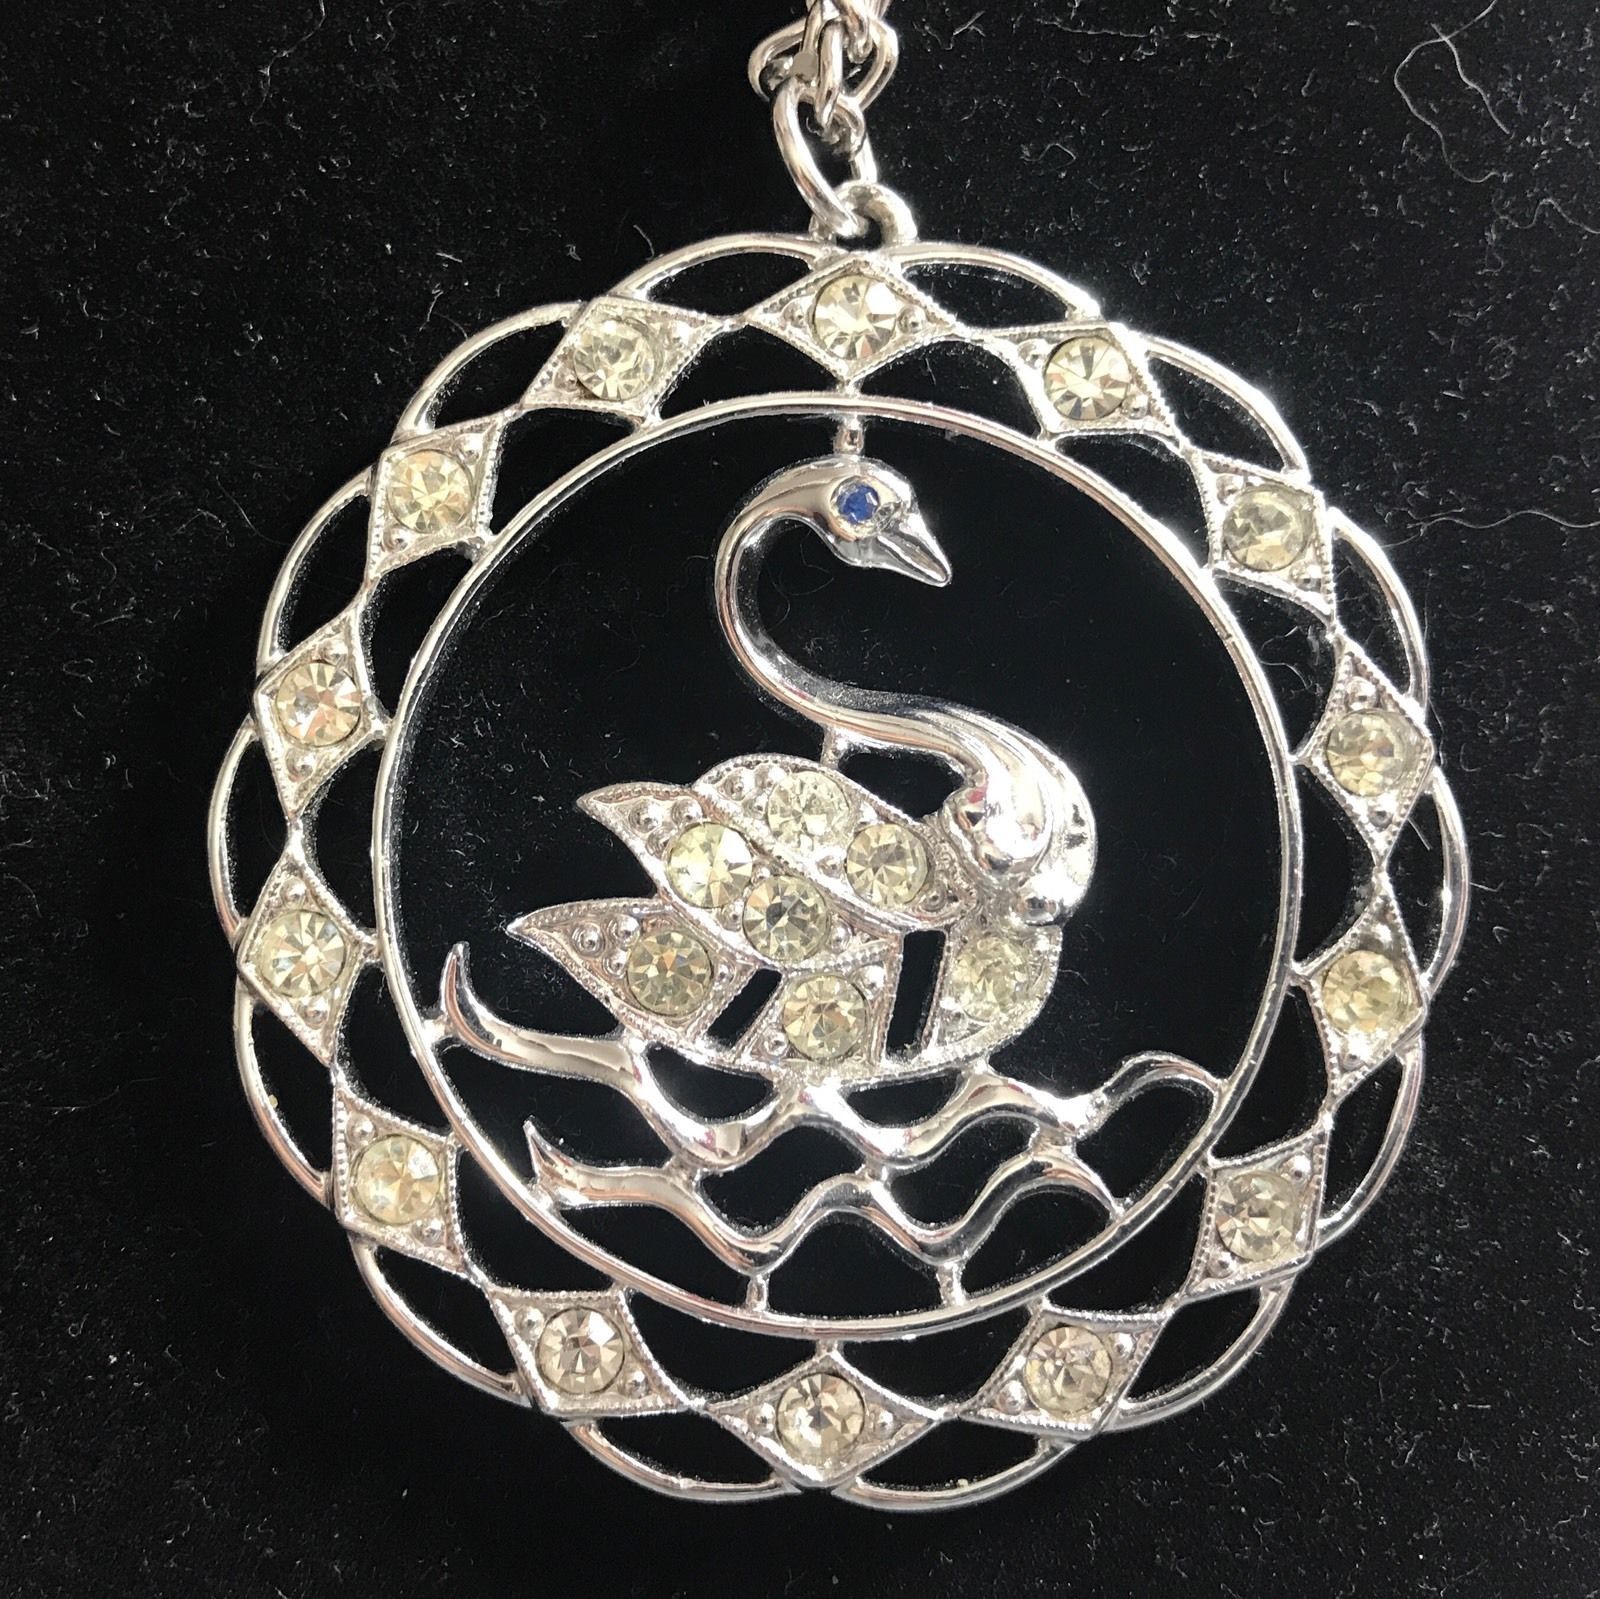 Vintage Signed SARAH COVENTRY Silver-Tone Metal Rhinestone Swan Pendant Necklace - $10.84